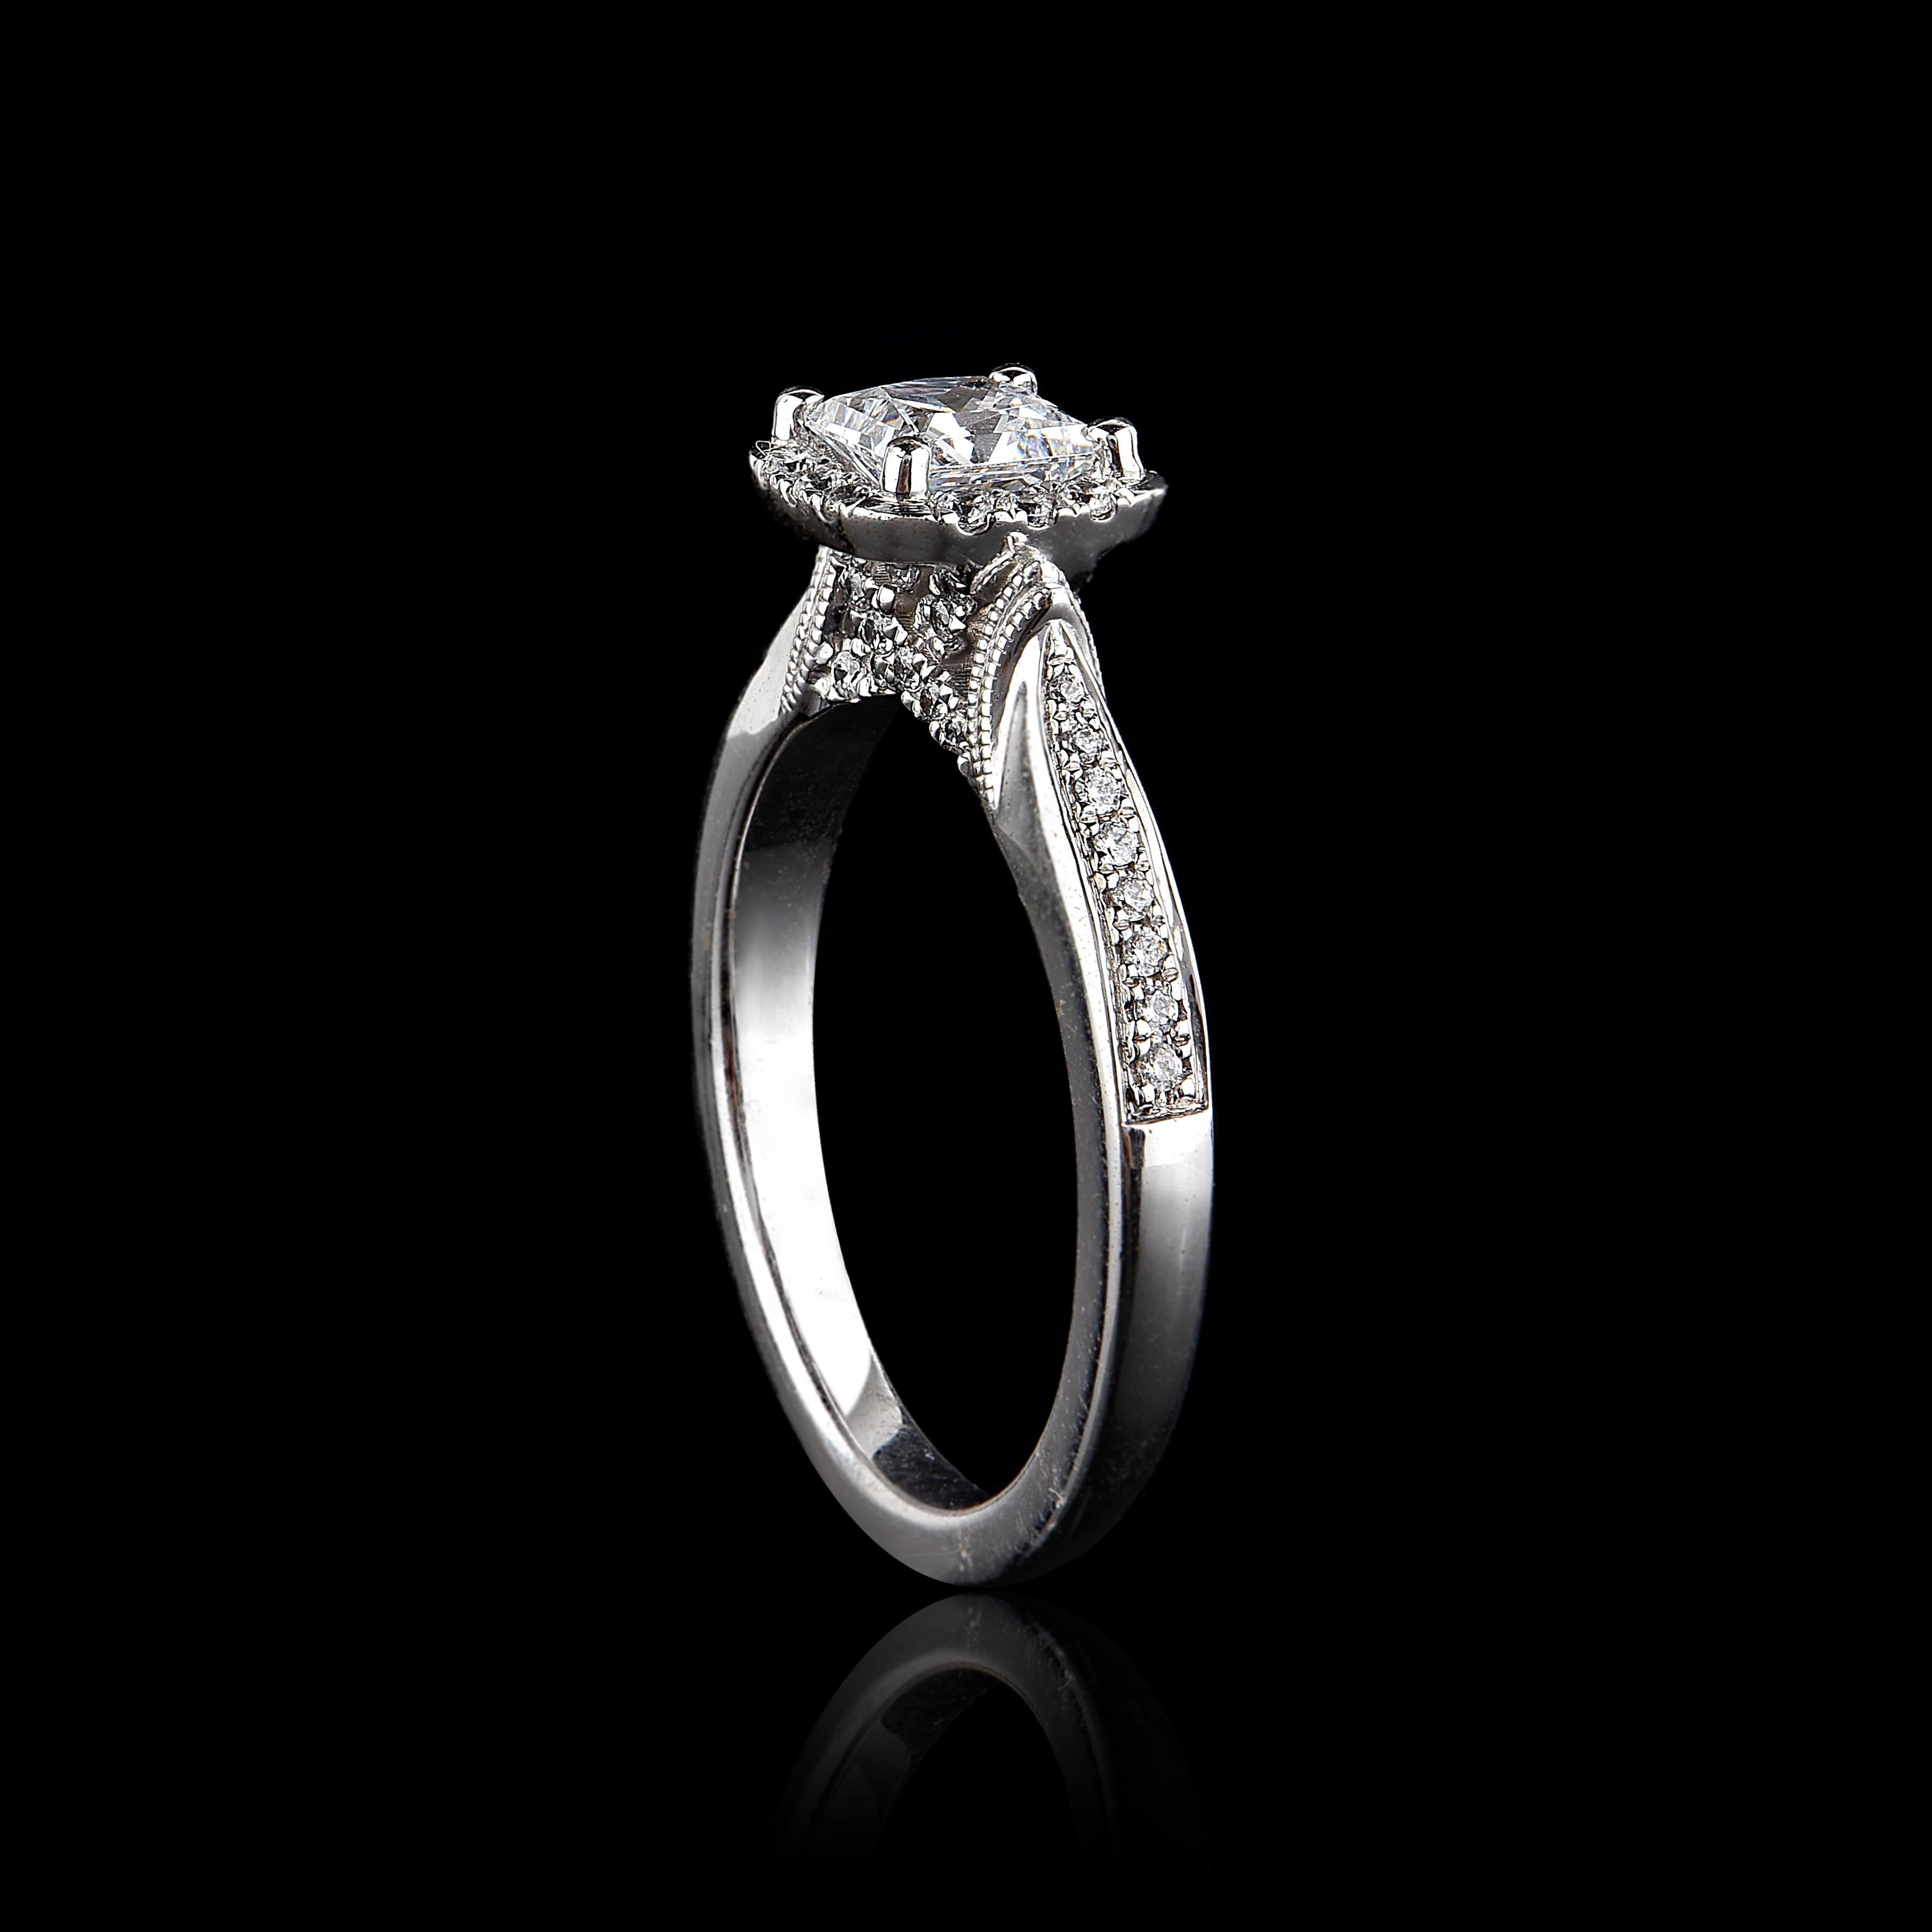 This diamond engagement ring is expertly crafted in 18 Karat White Gold and features 0.75 ct centre stone and 0.25 ct of diamond frame and shank lined diamonds set in prong setting. The diamond are natural, not treated and dazzles in G-H color SI1-2